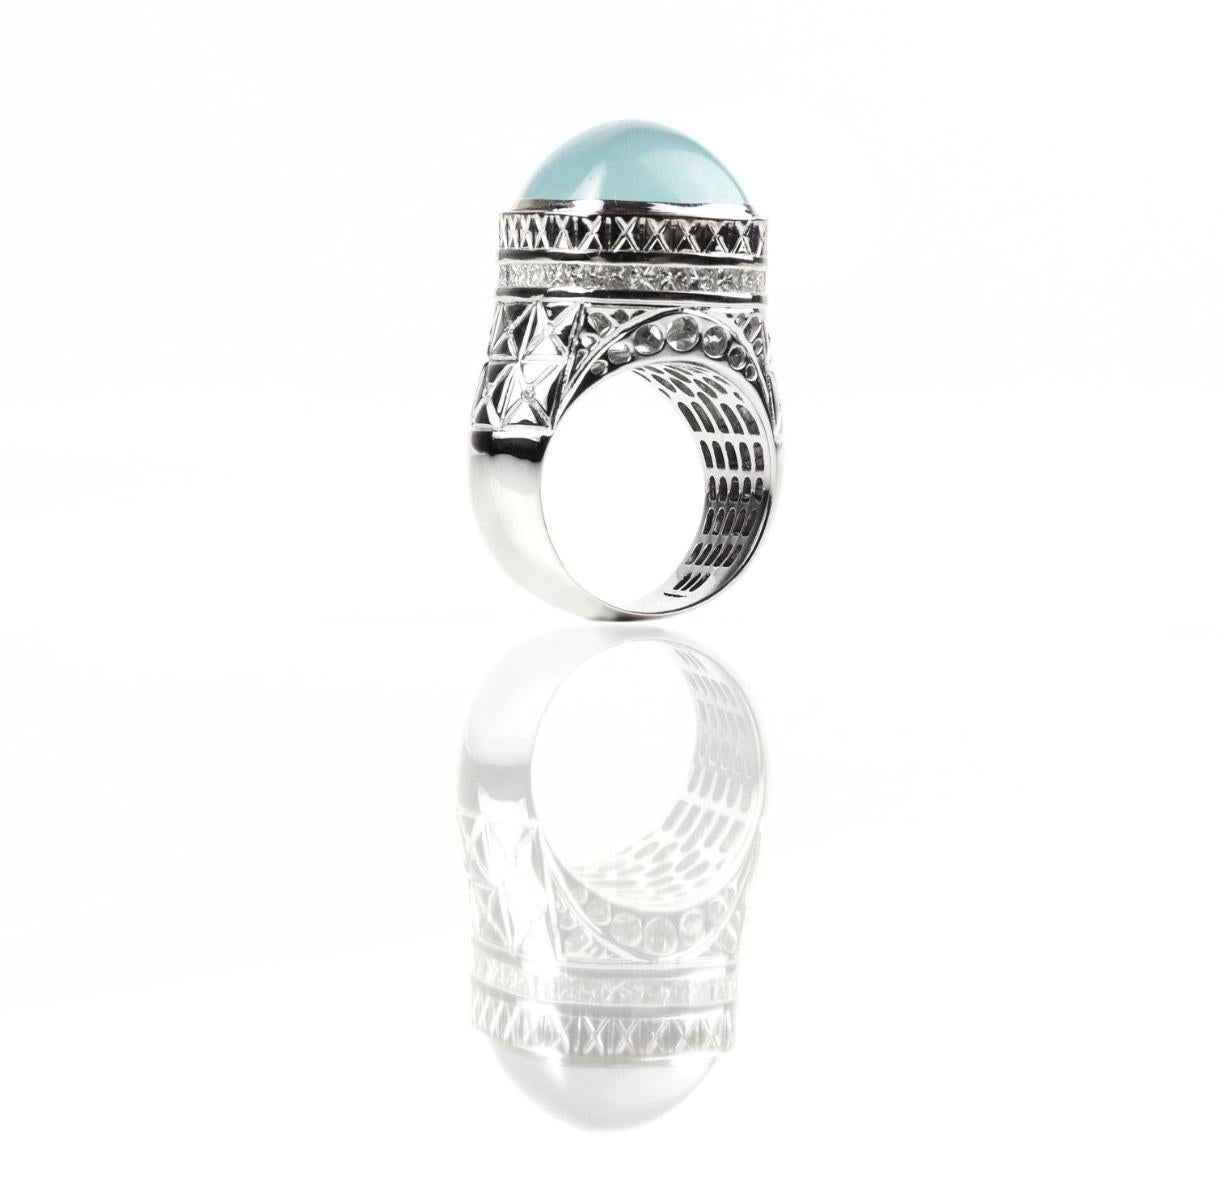 Hand made in 18 karat White Gold, this cocktail ring has a large Aquamarine Cabochon approximately 10 carats, 1.15 carats of diamonds and an intricate design to let the light through the back of the ring. Part of our Architecture Collection,